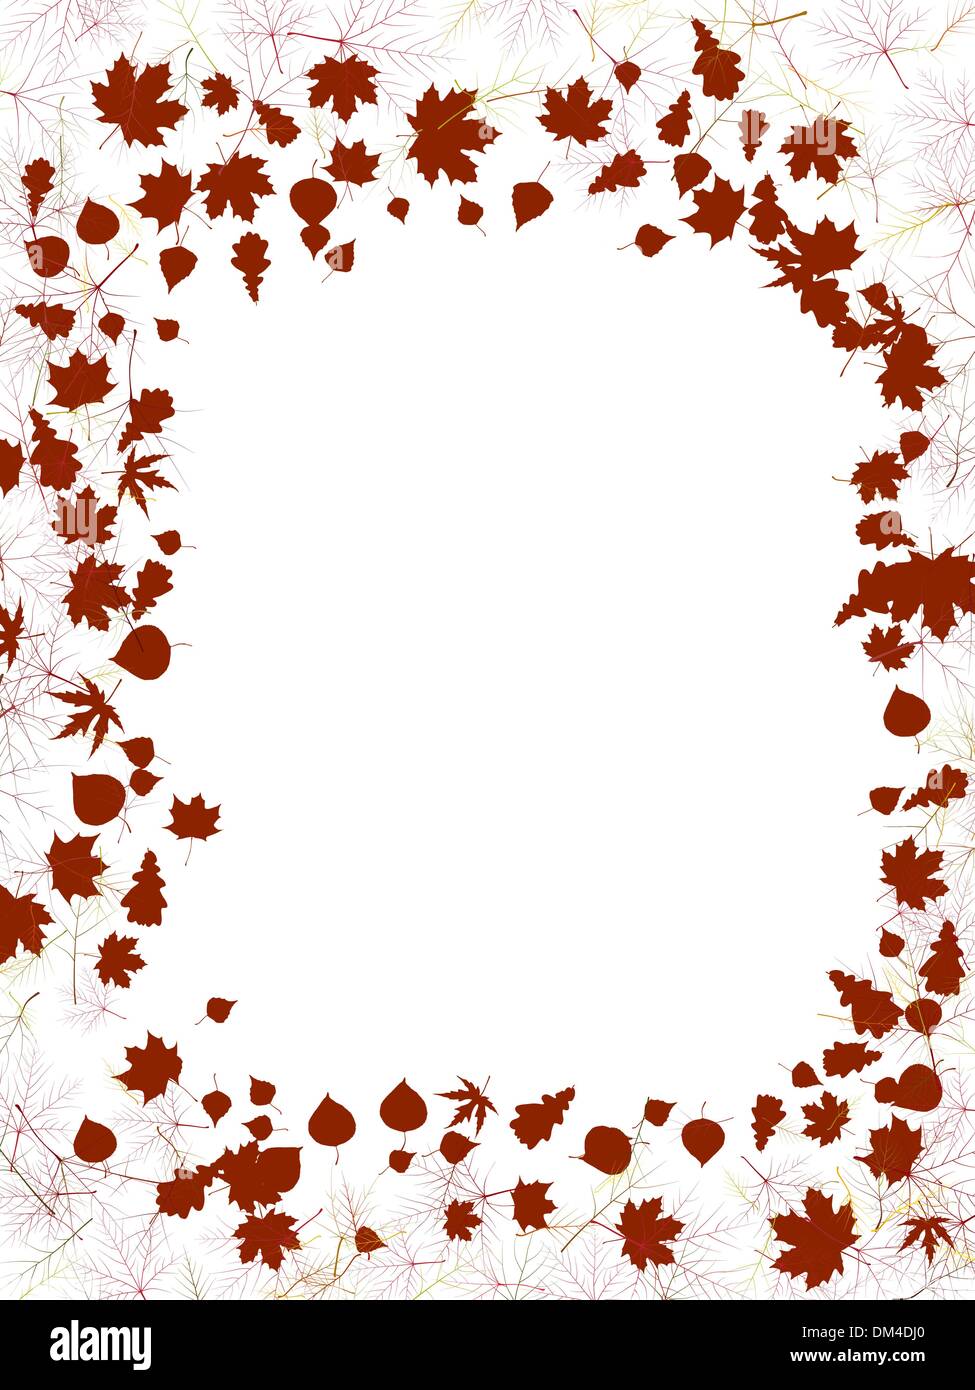 Autumn frame from leaves Stock Vector